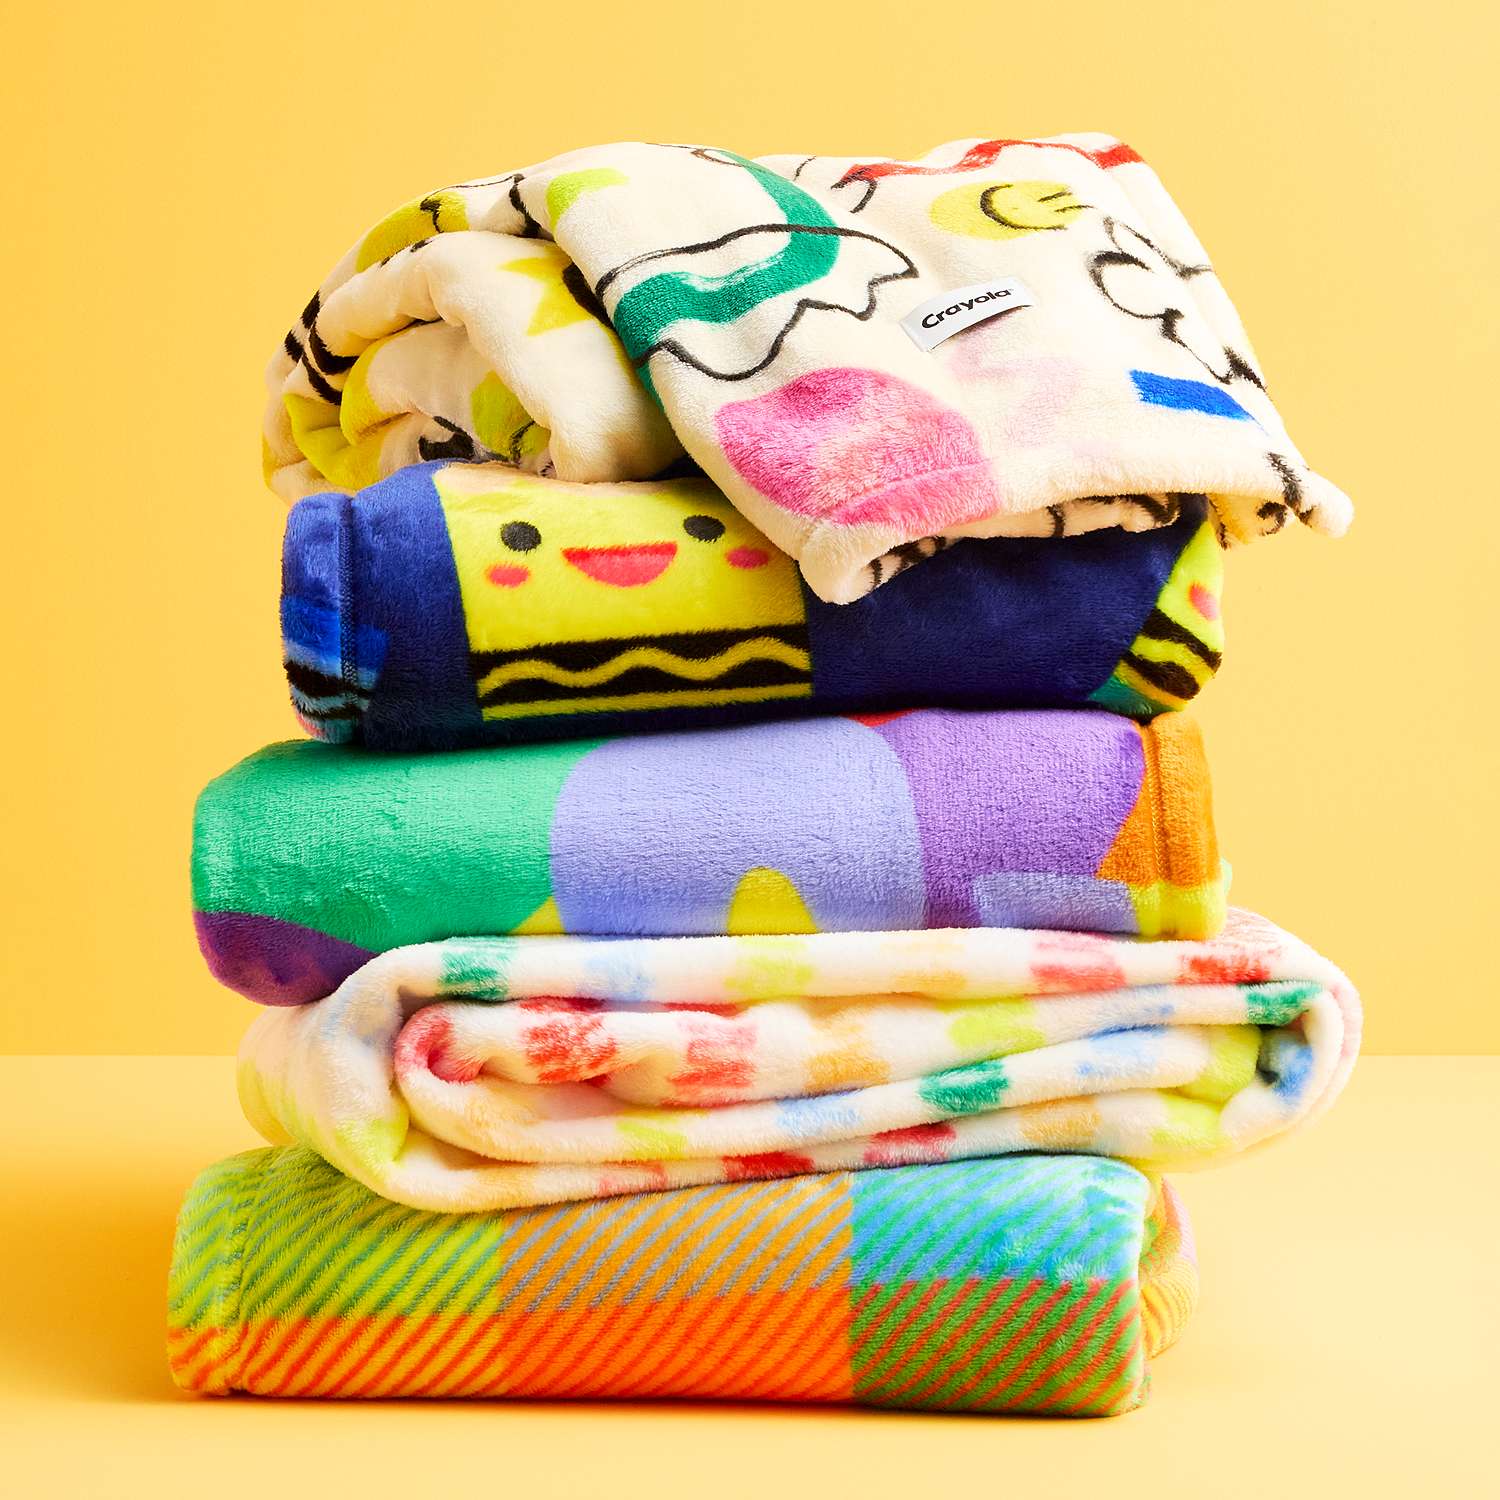 Crayola X Kohl's: Plush Throw Blanket $8.49, 24" Oversized Squishy Pillow $7.42, 2-Pack Doodle Throw Pillows $5.49, Fleece Pullover $9.62, More + Free Store Pickup or FS on $49+